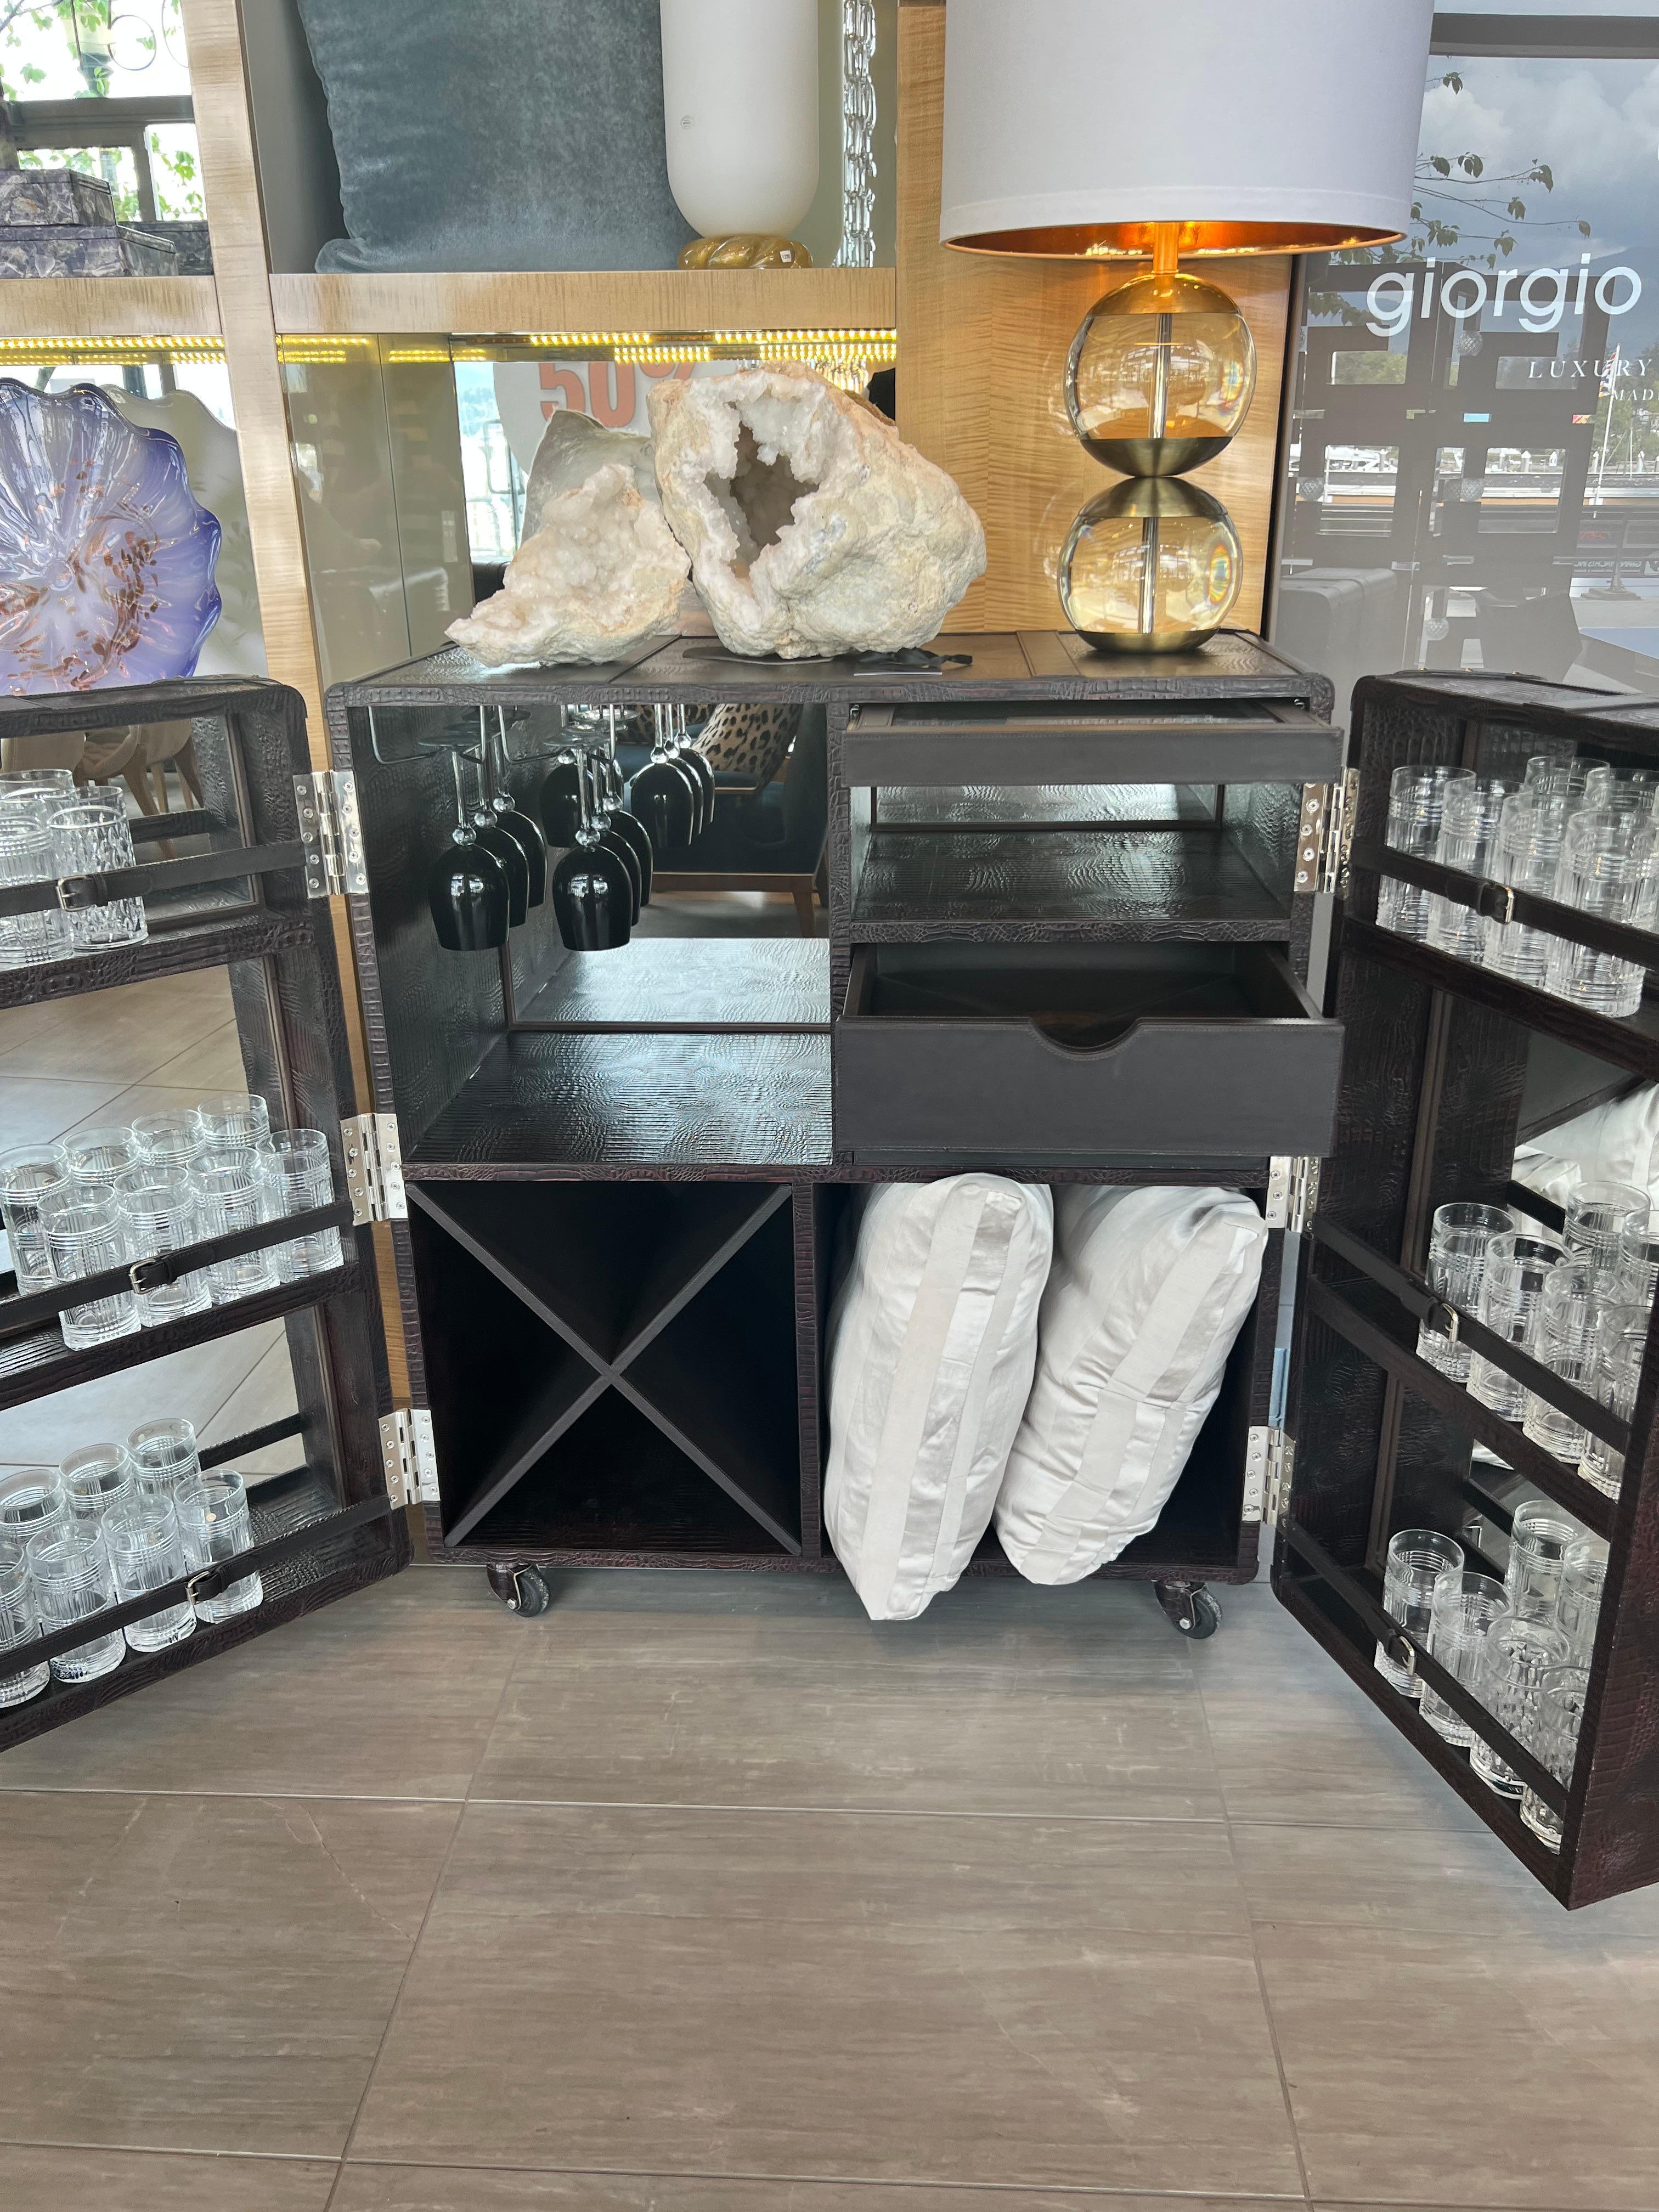 Own this amazing chocolate brown croc embossed leather rolling dry bar cabinet.
Mirror backed with french doors for glass and bottle storage.
Pull out beveled glass serving shelf and padded leather drawers for storage.